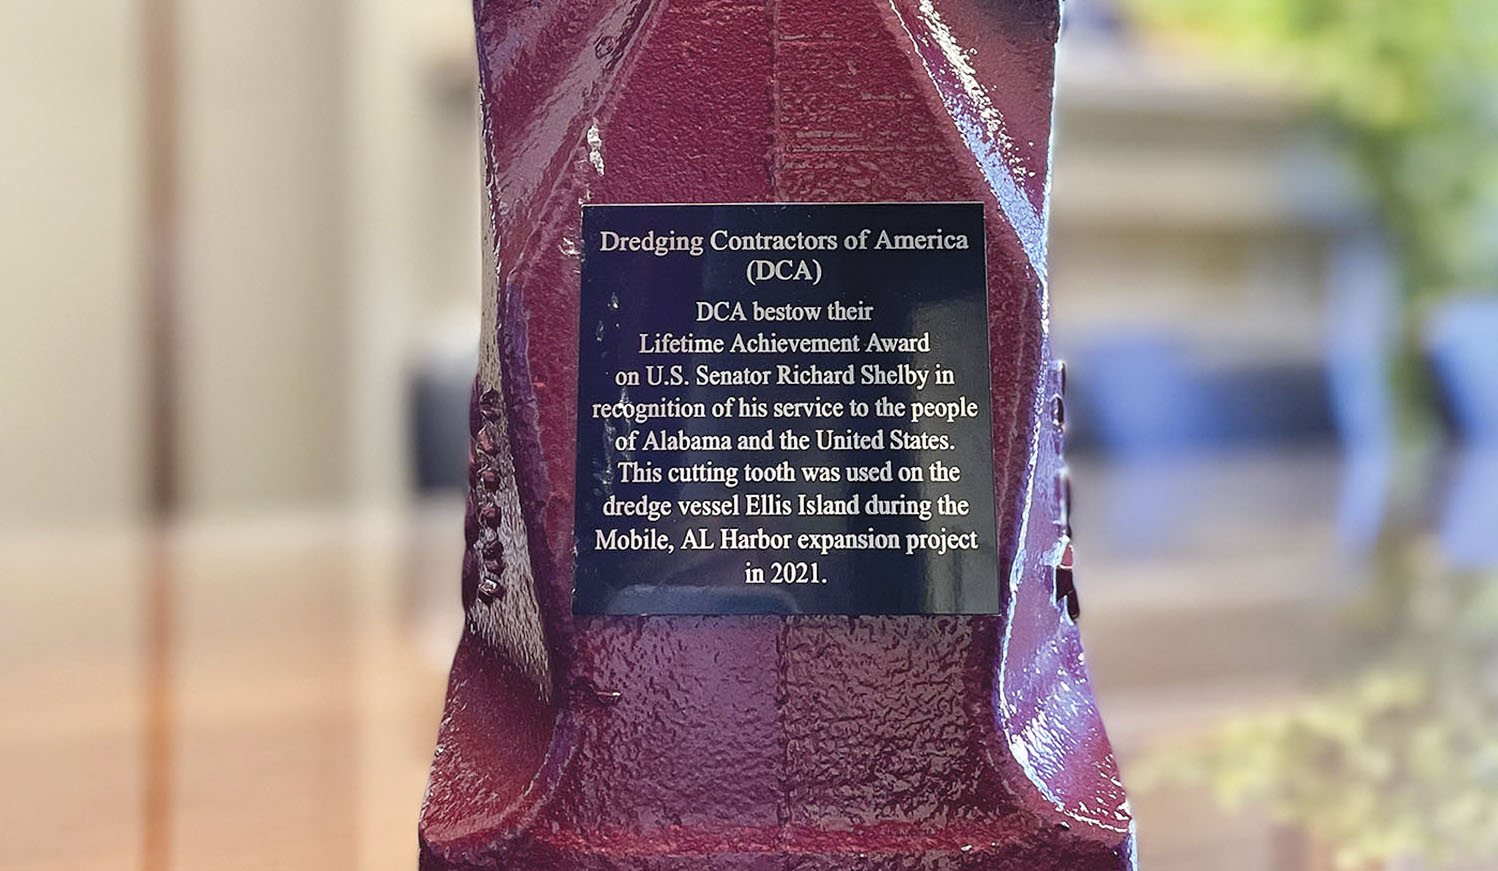 The Lifetime Achievement Award for Sen. Richard Shelby was formed from a cutting tooth used on the dredge Ellis Island during the Mobile Harbor expansion.